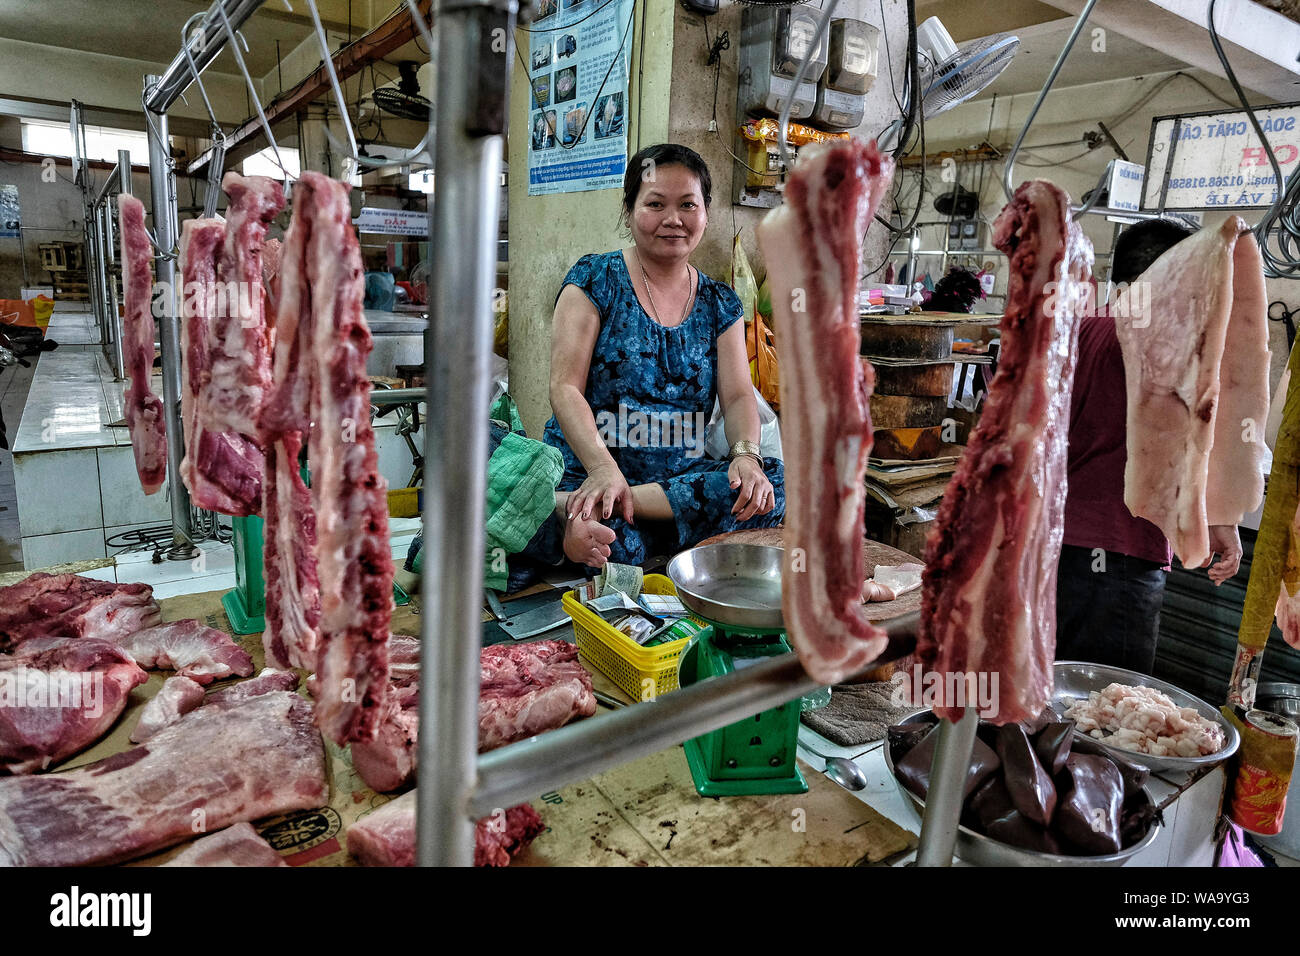 My Tho, Vietnam - August 9: A woman sell meat on market on August 9, 2018 in My Tho, Vietnam. Stock Photo